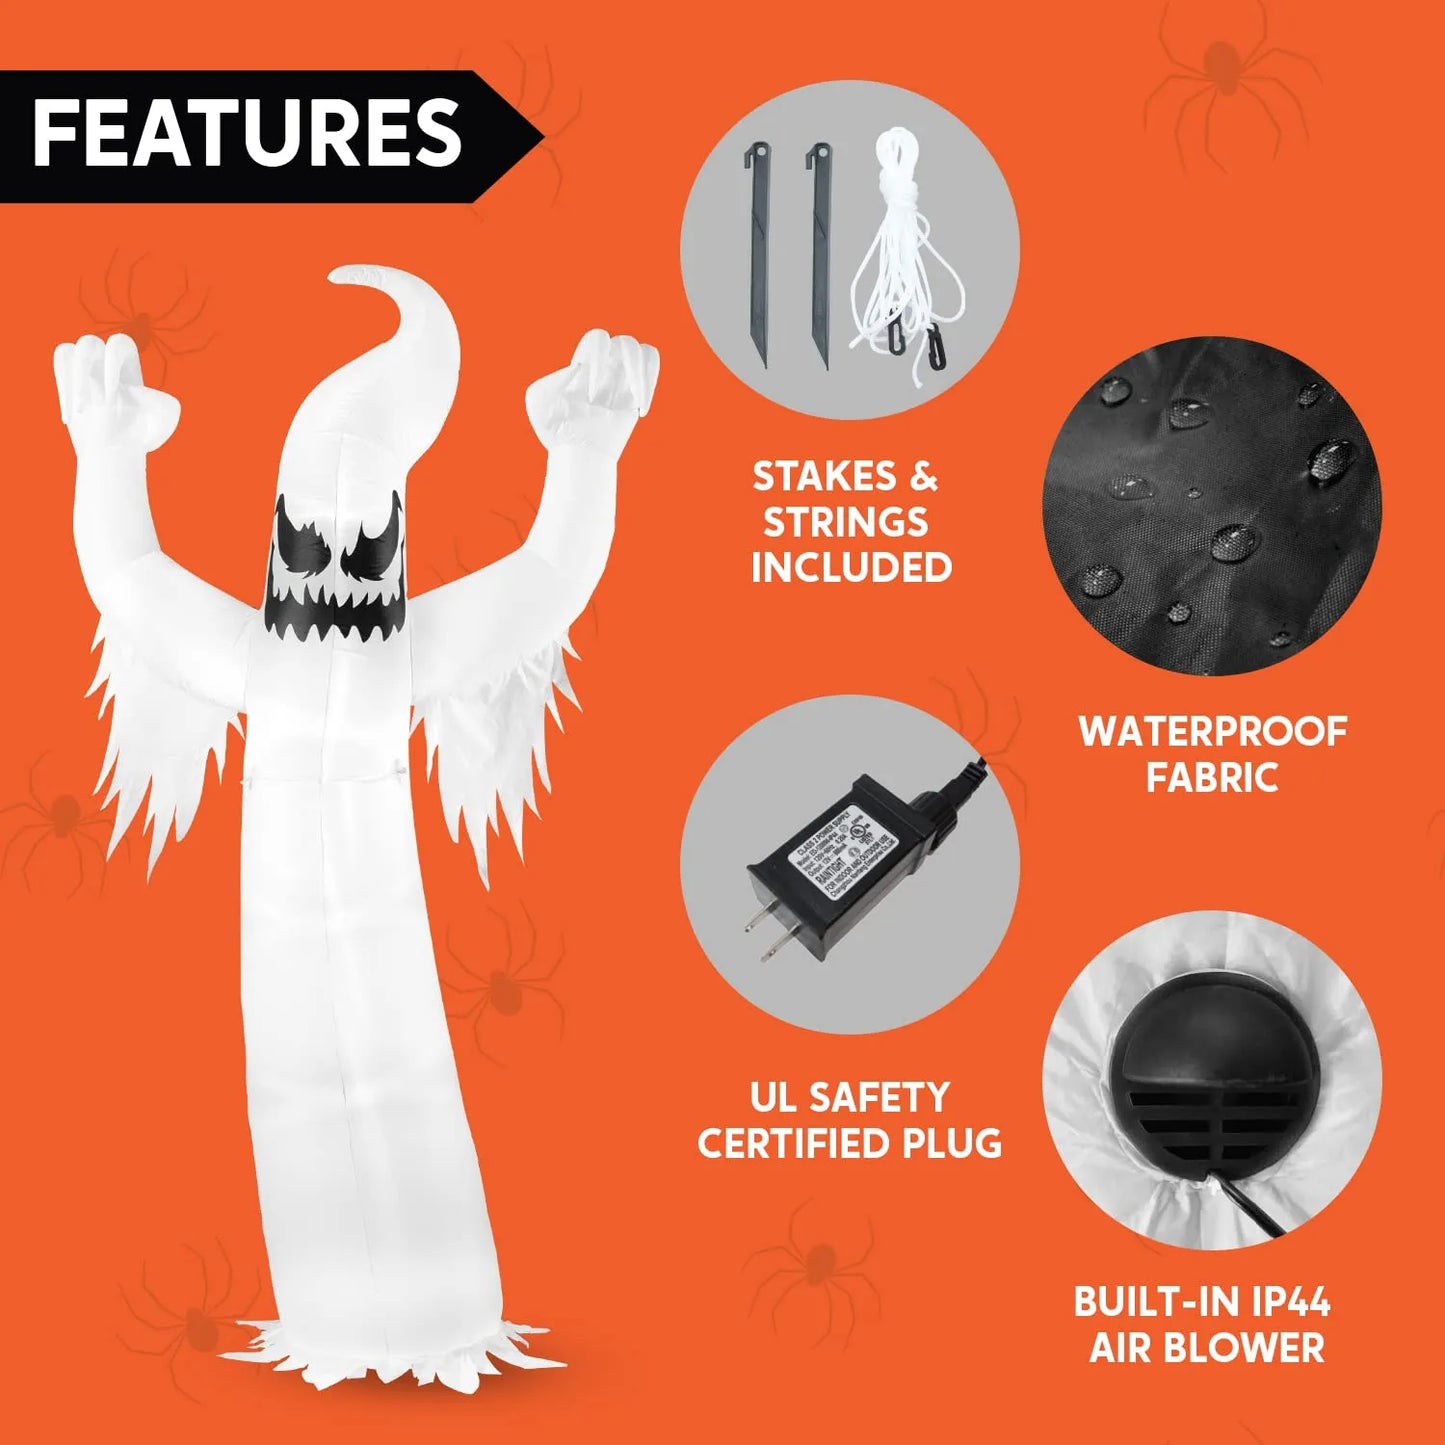 JOIEDOMI | 12 FEET HALLOWEEN INFLATABLE SCARY SPOOKY GHOST – Joiedomi